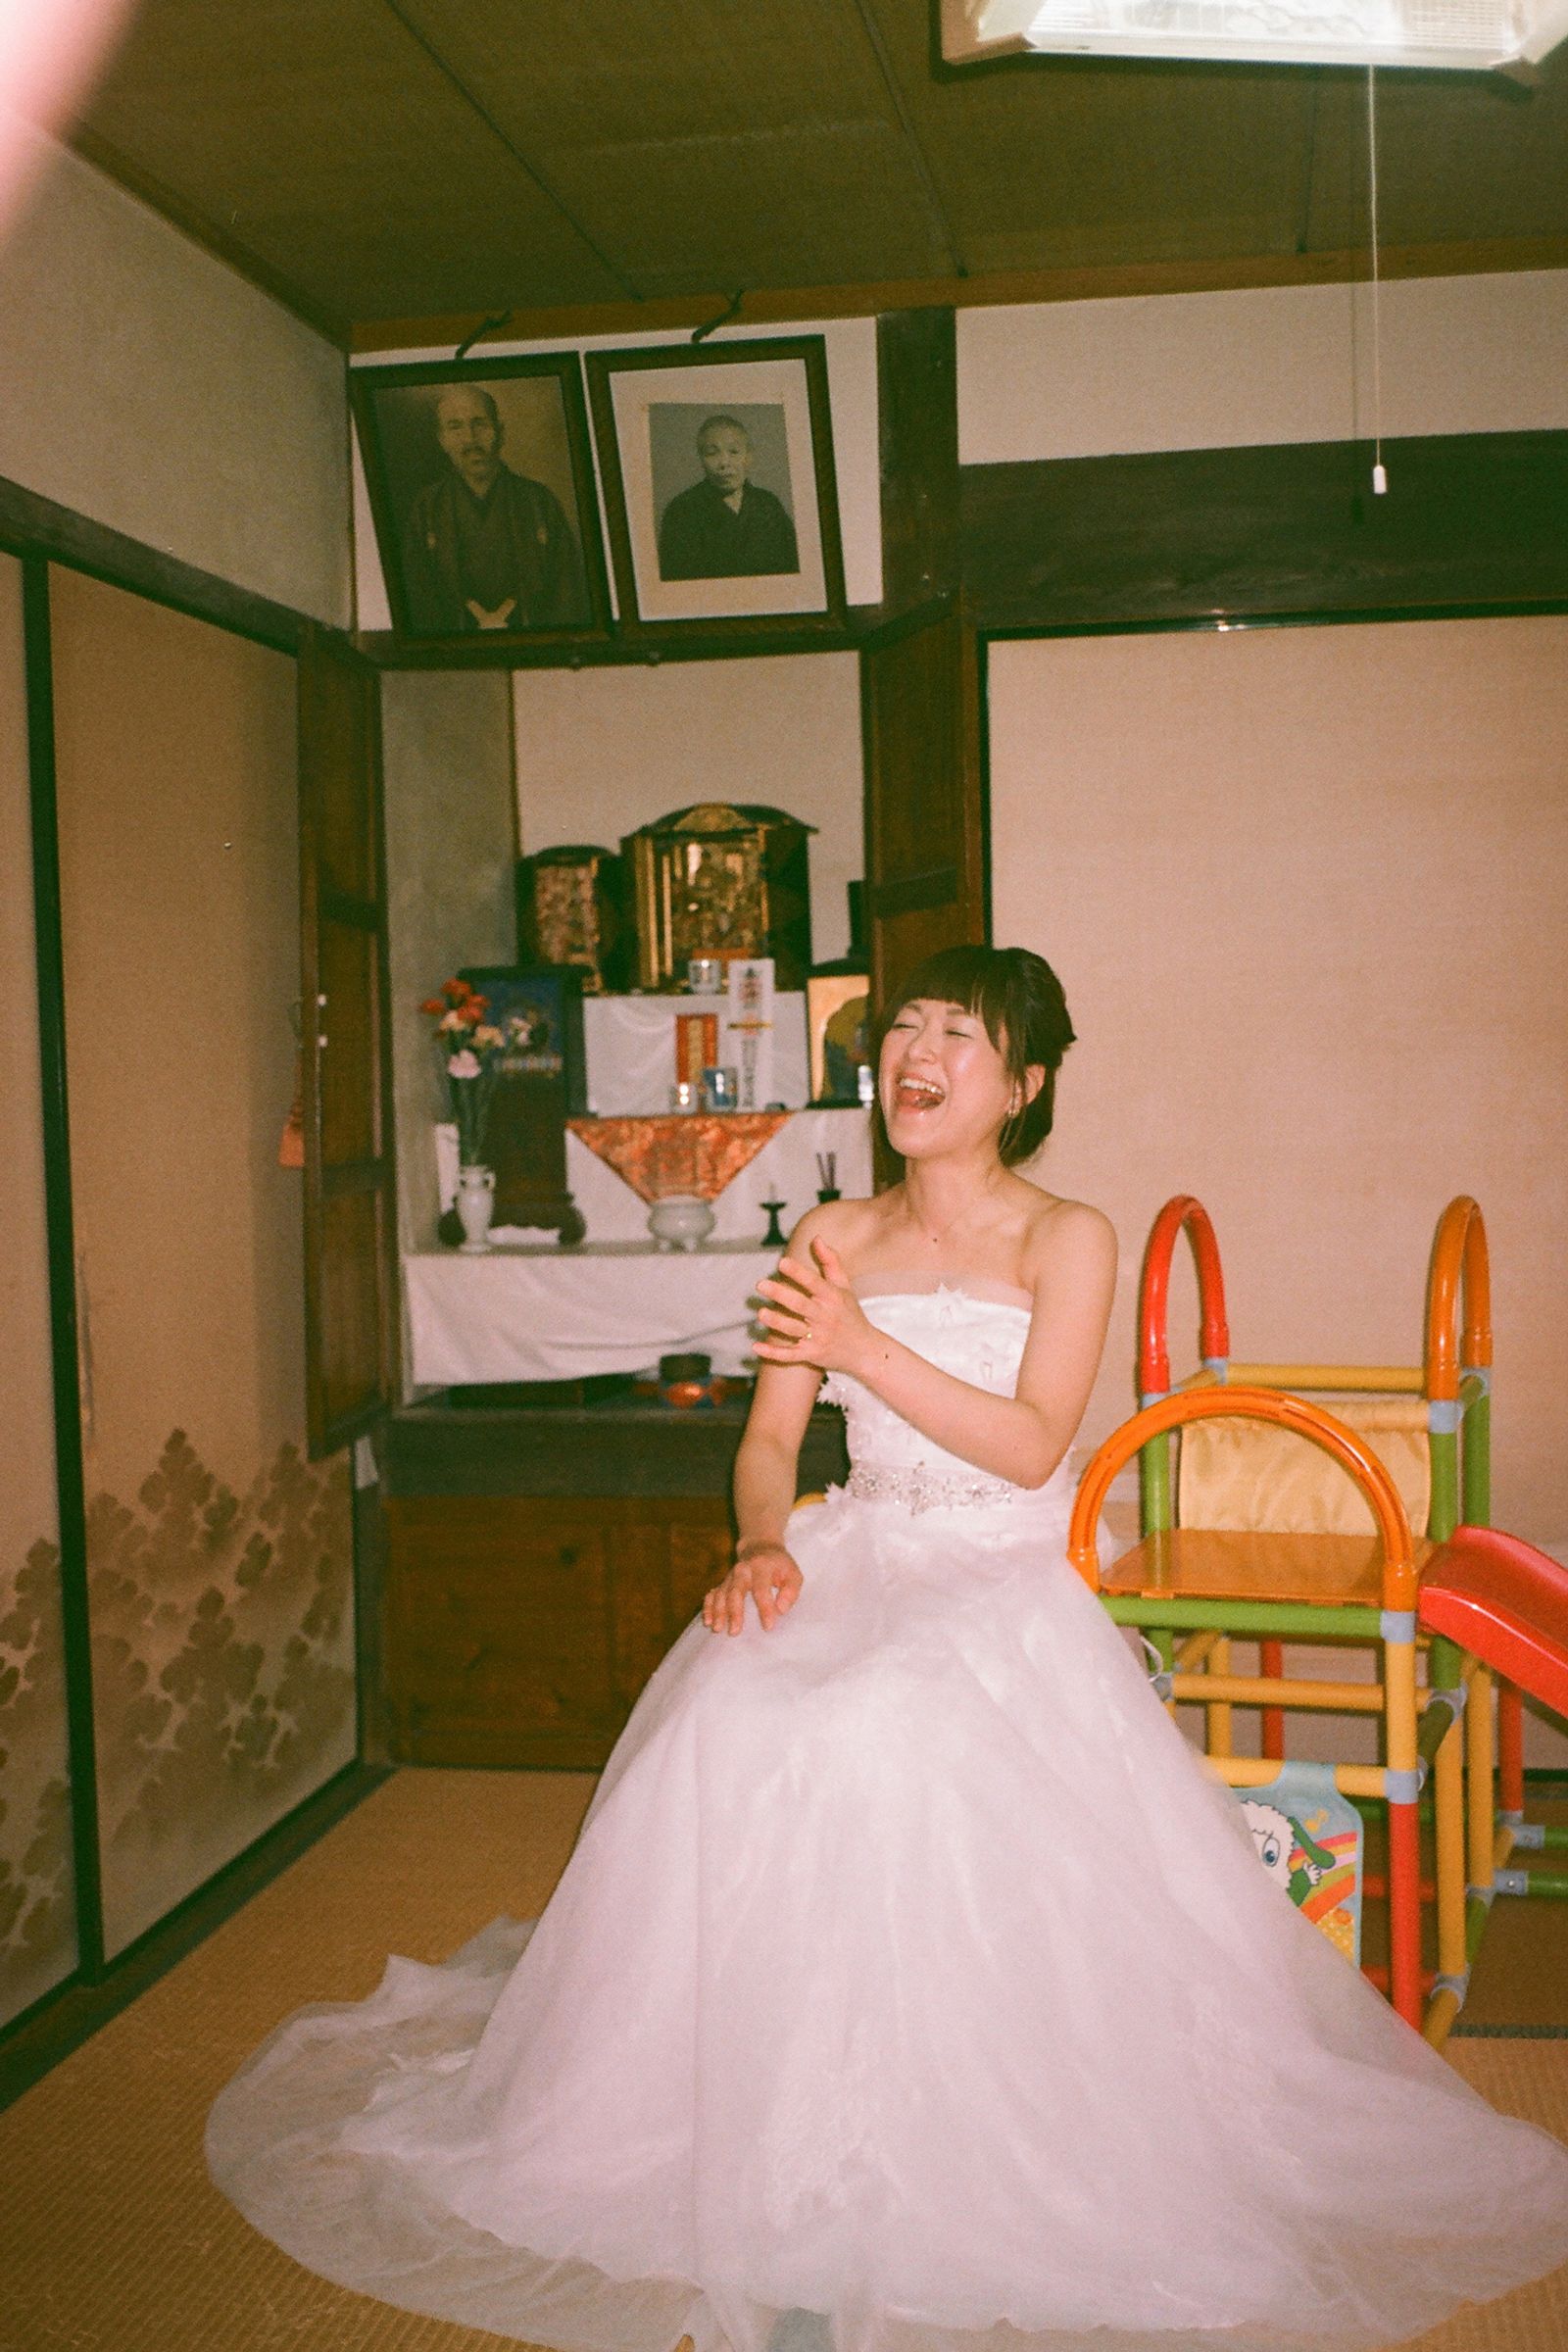 © Kenta Nakamura - It was taken in the Buddhist room of my parents' house when my sister was getting married.